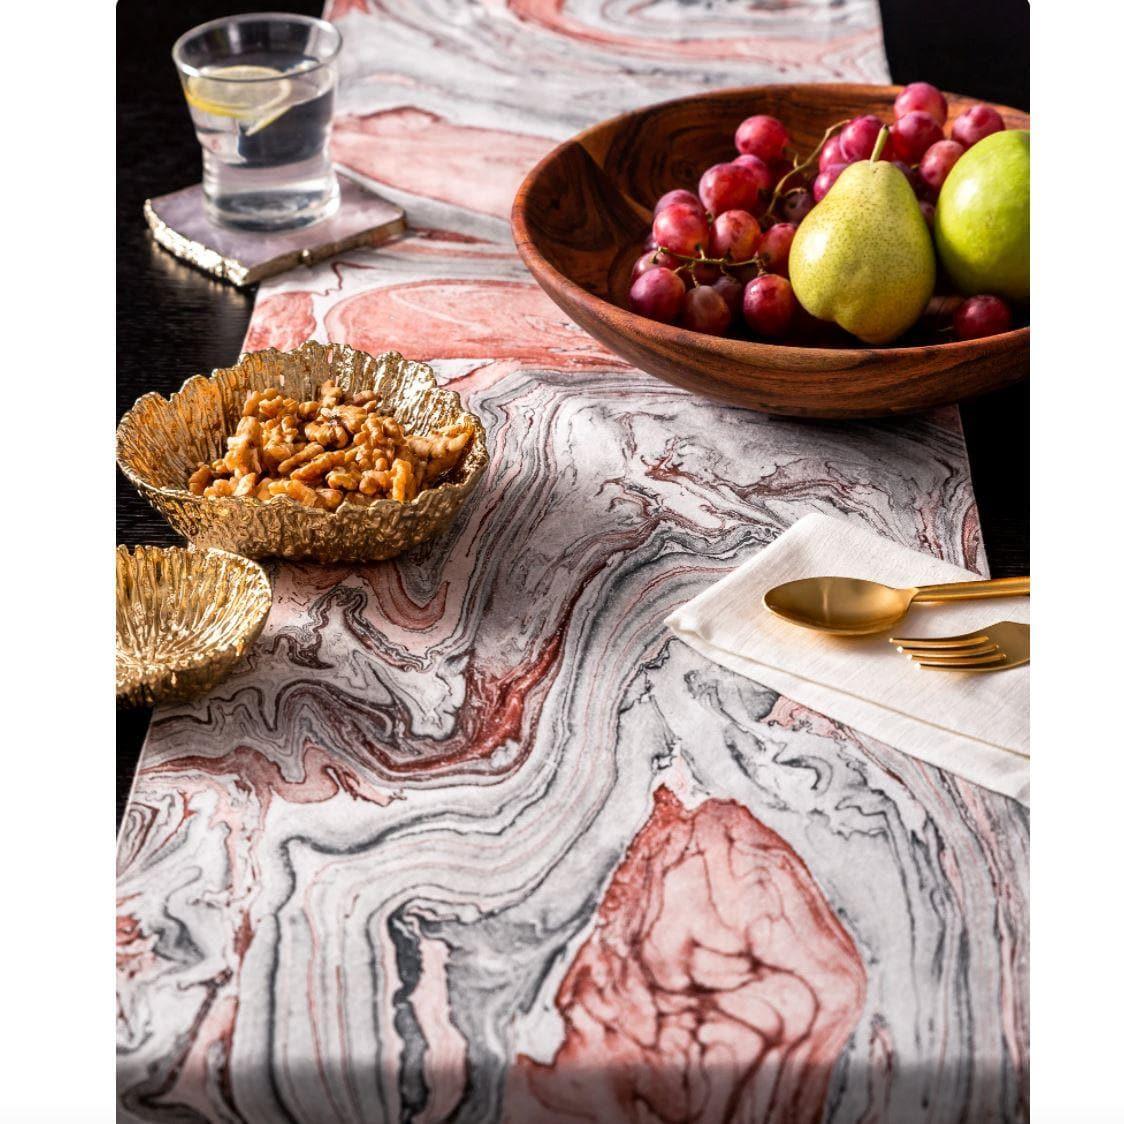 Serein Decor Marble Print Table Runner - Pink - MAIA HOMES